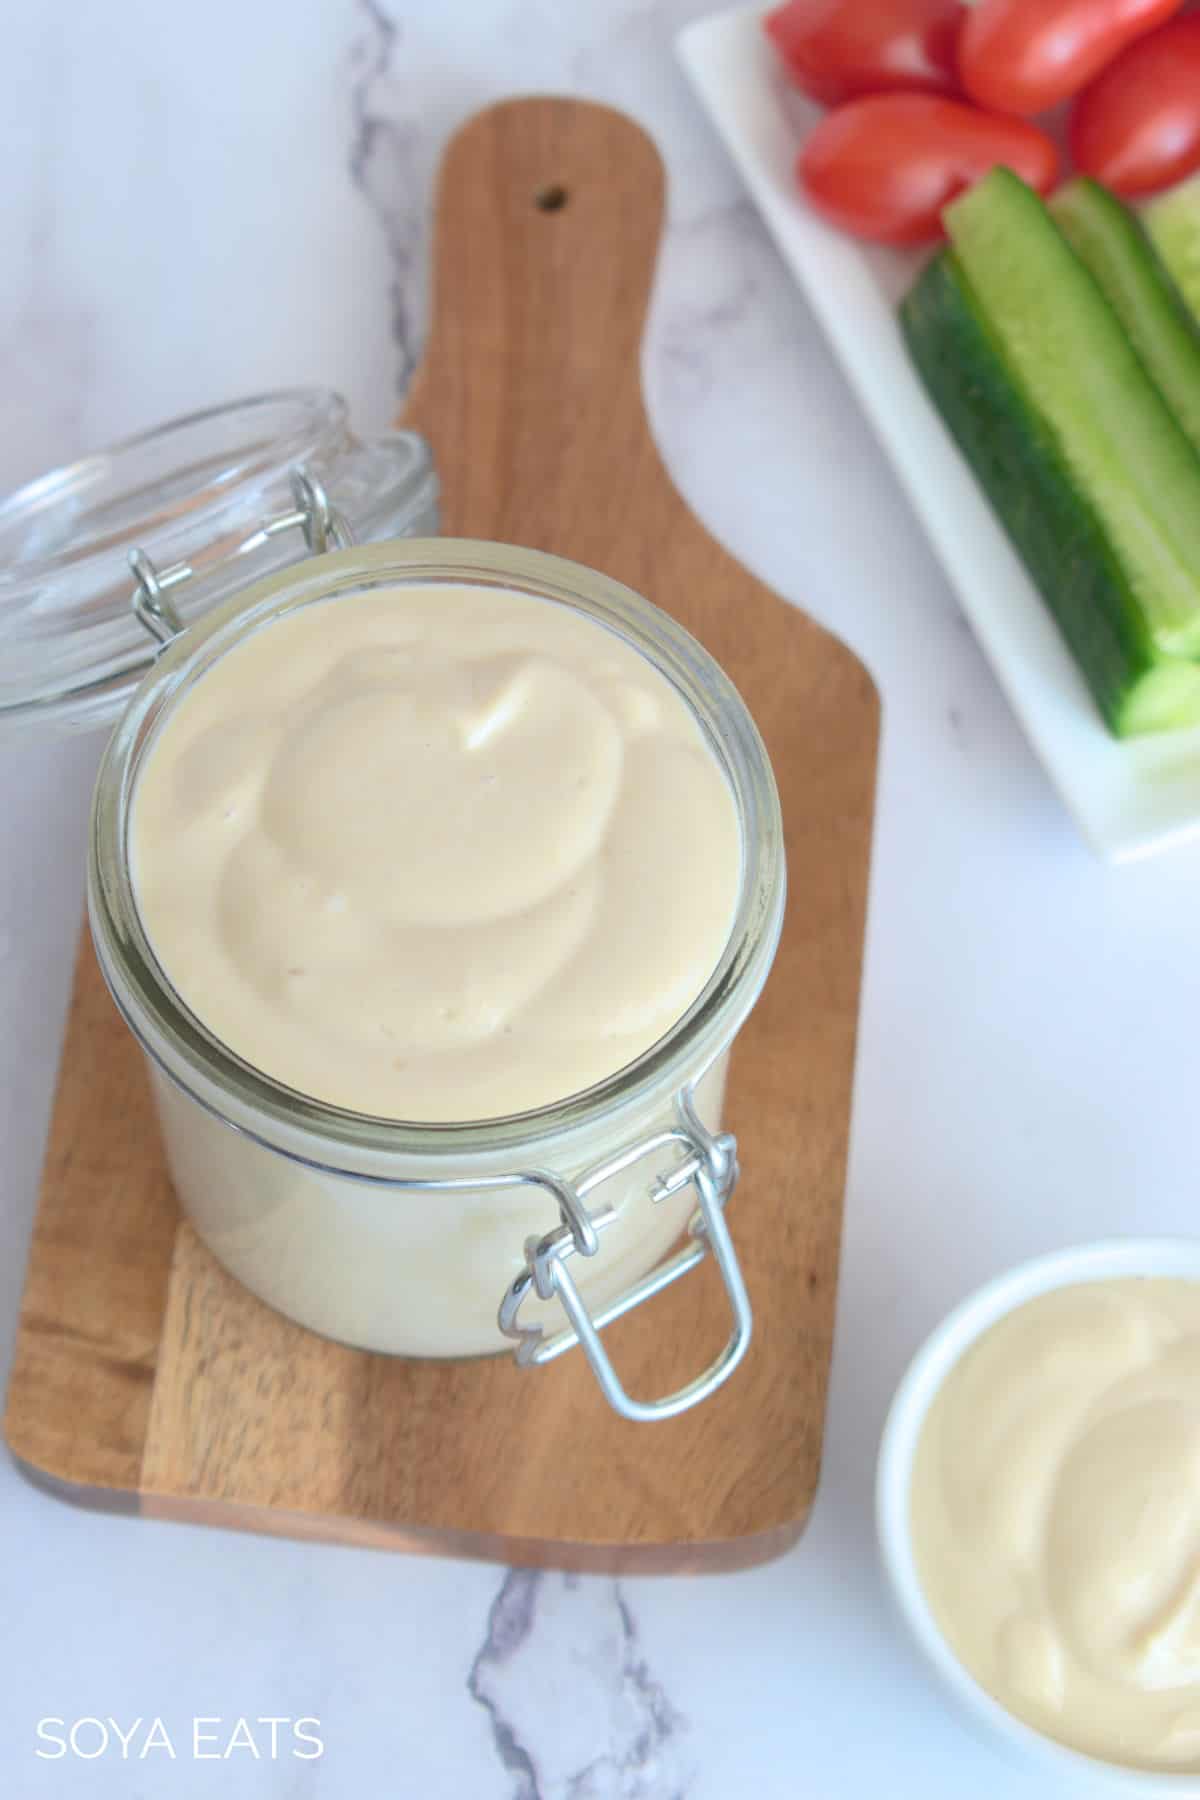 Top down view of homemade low fat vegan mayonnaise in a jar with vegetables in the background.